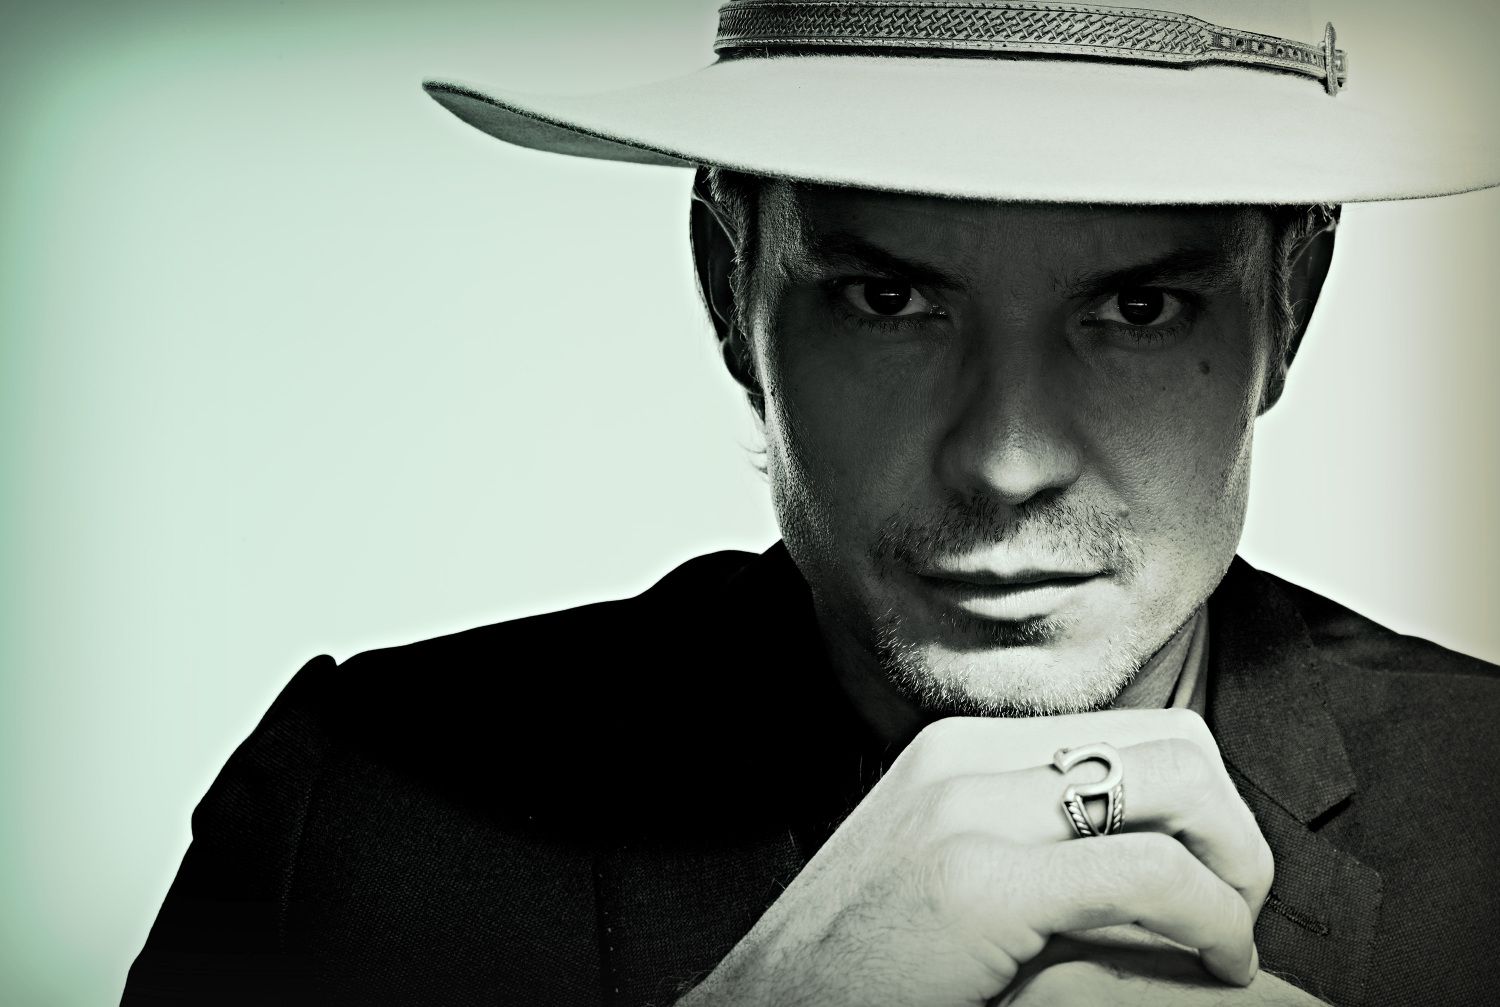 Timothy Olyphant discusses Season 4 of Justified, returning Tuesday, January 8